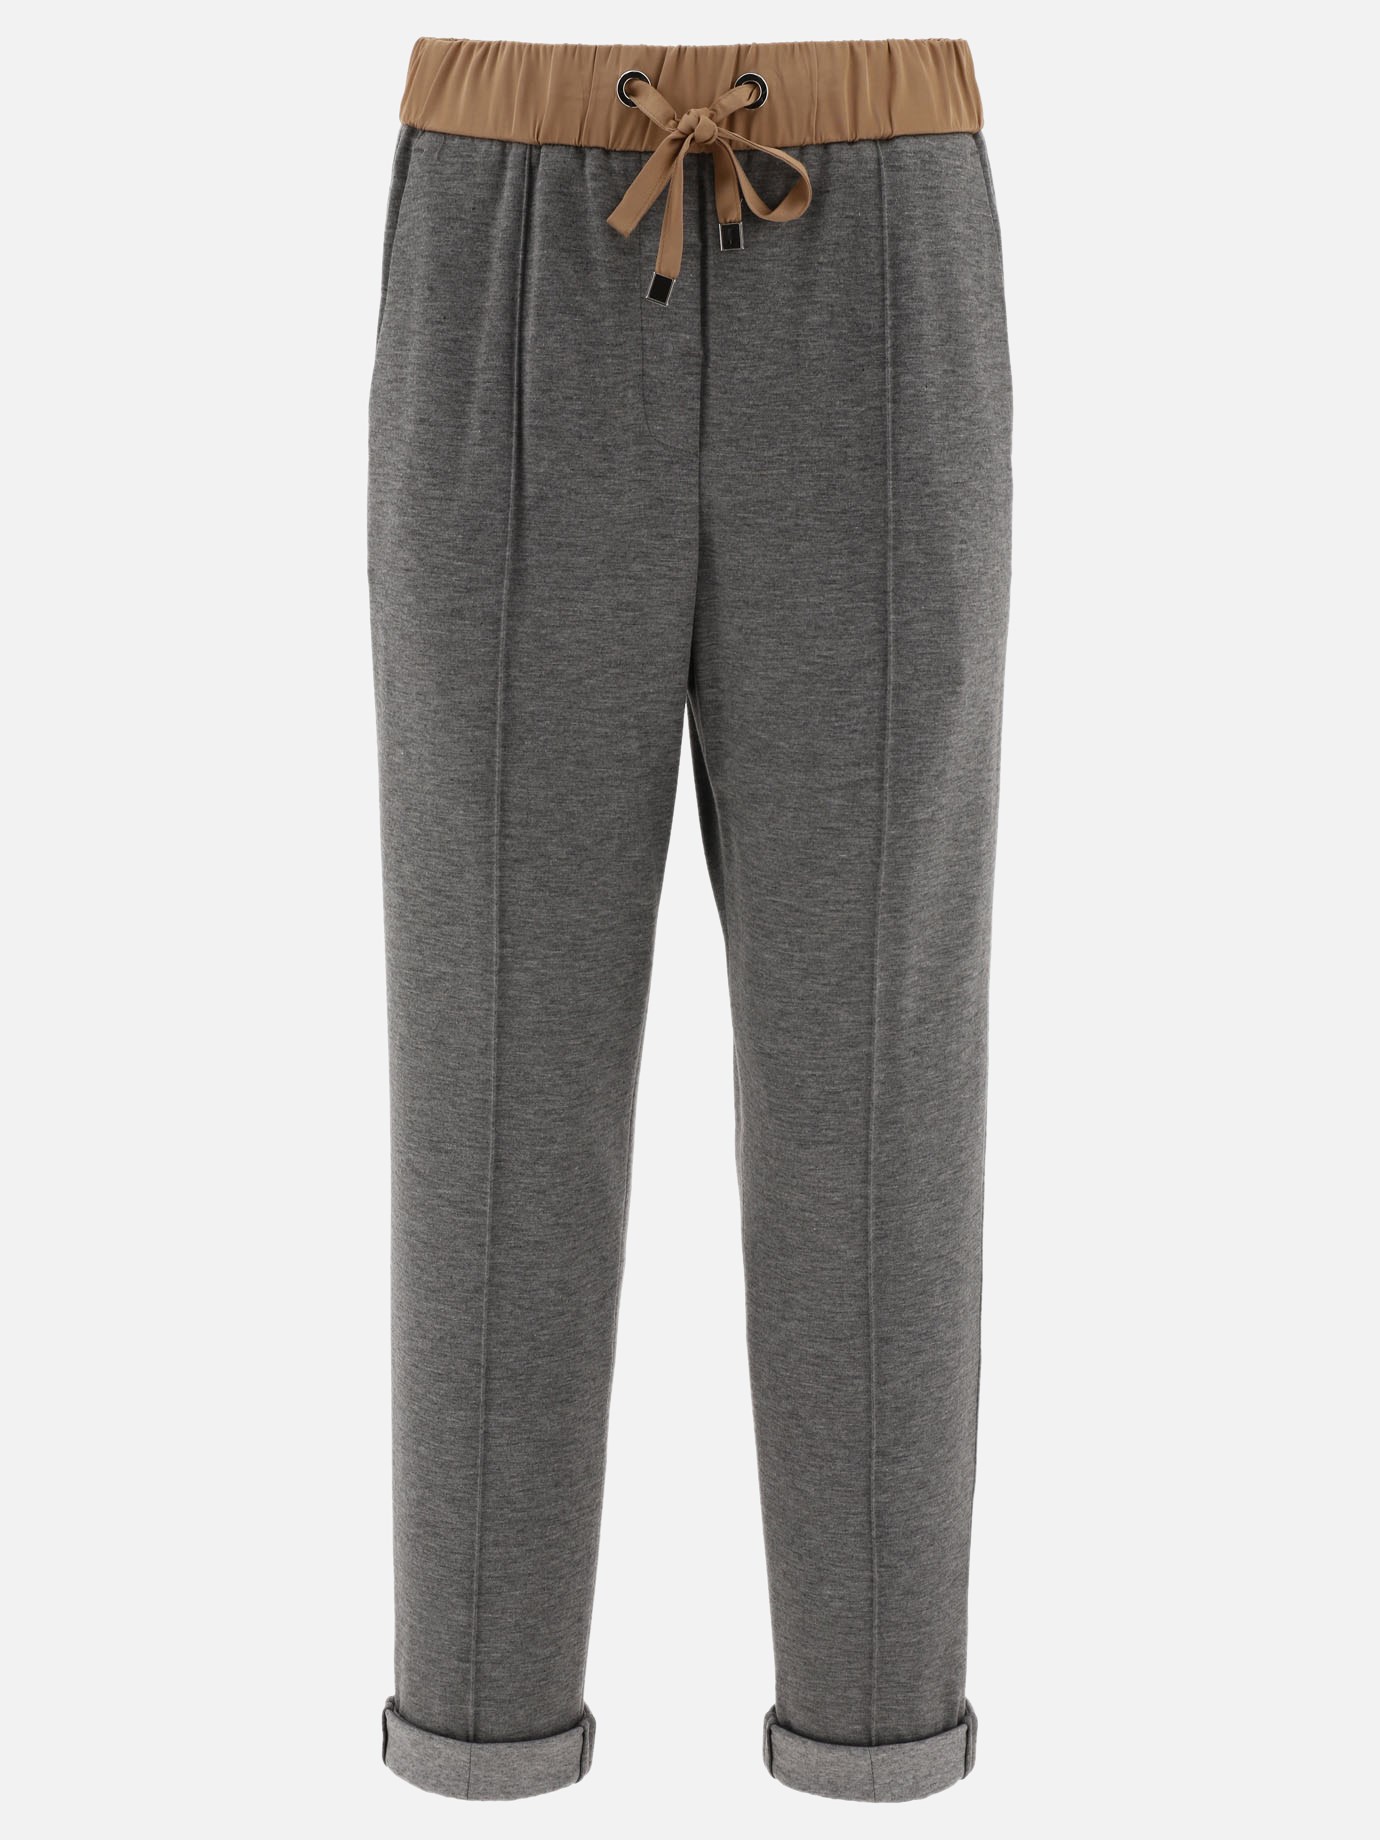 Sweatpants with turn-up